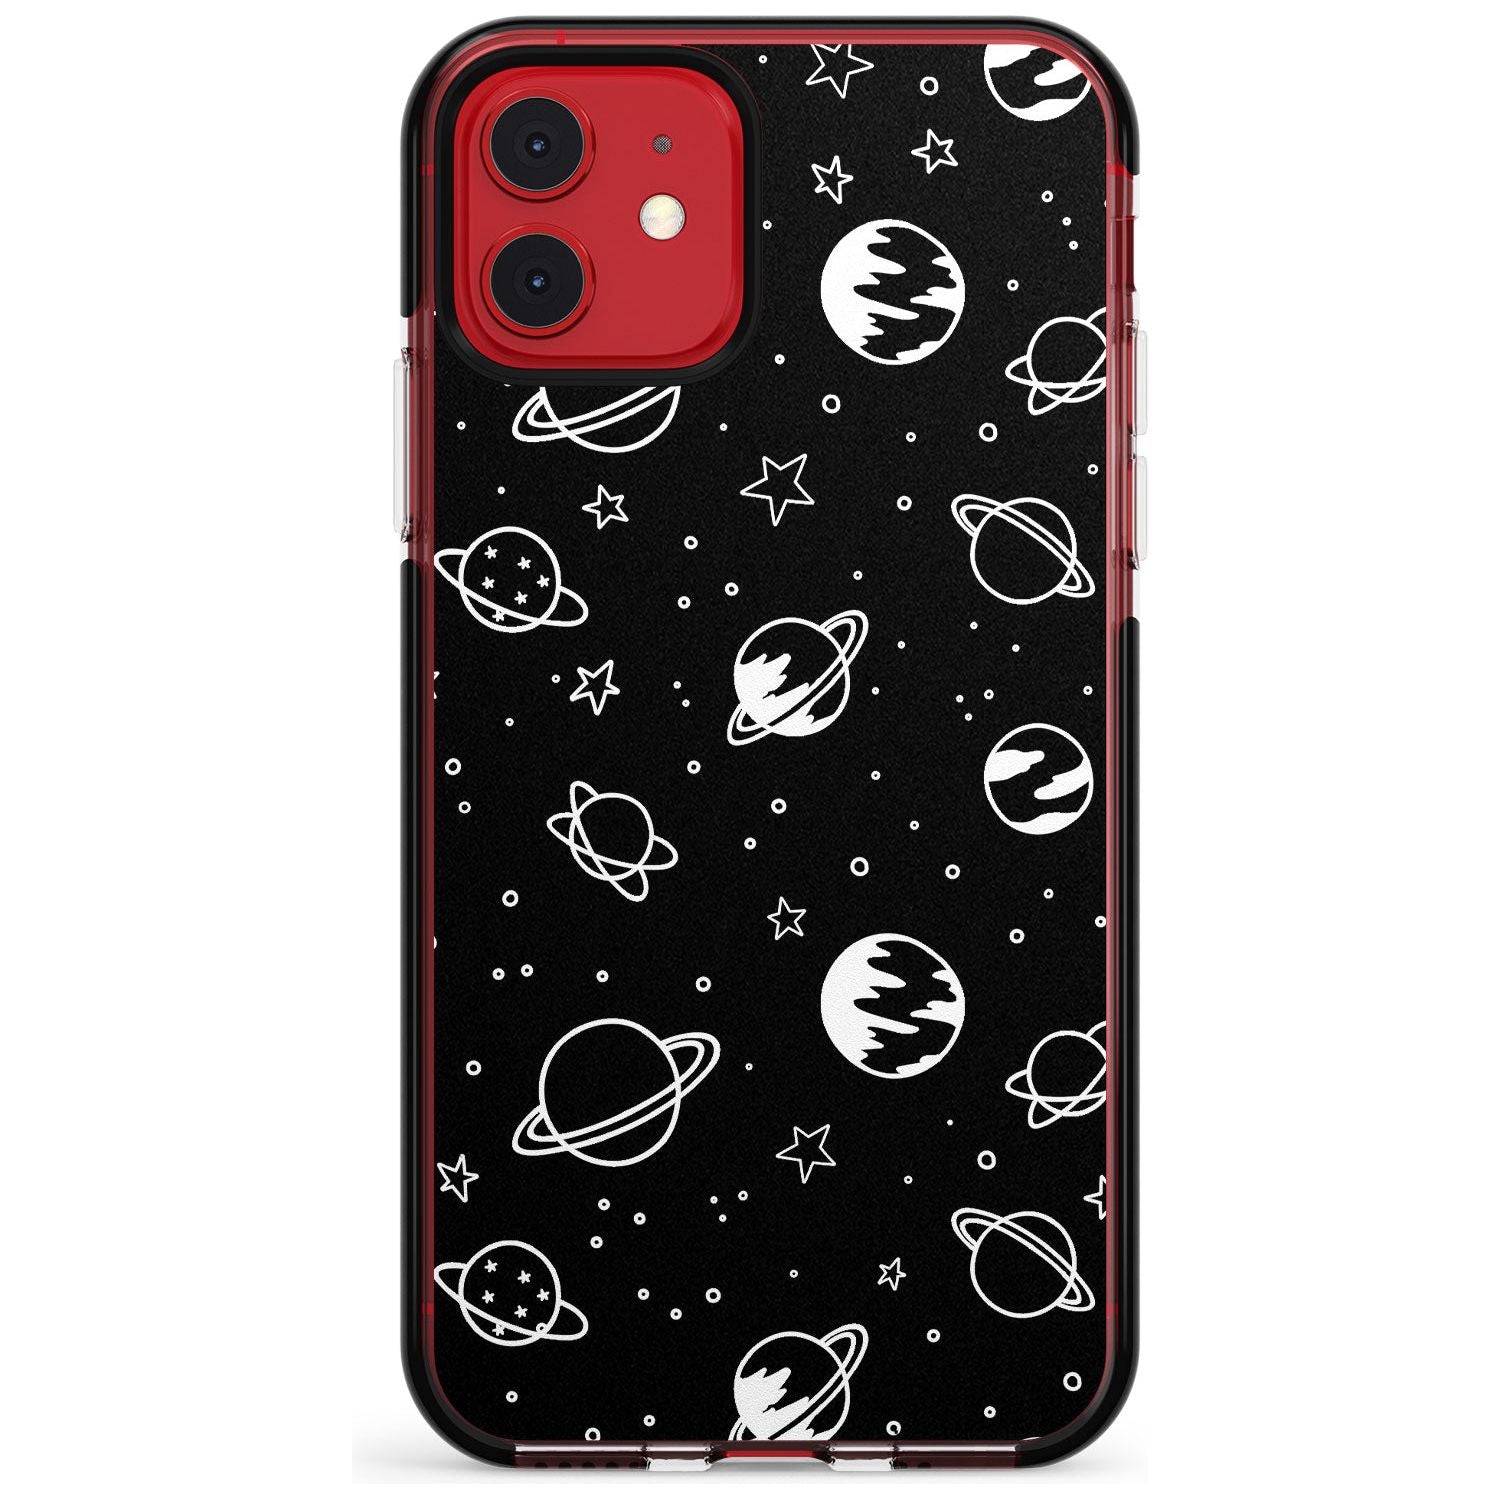 Outer Space Outlines: White on Black Pink Fade Impact Phone Case for iPhone 11 Pro Max